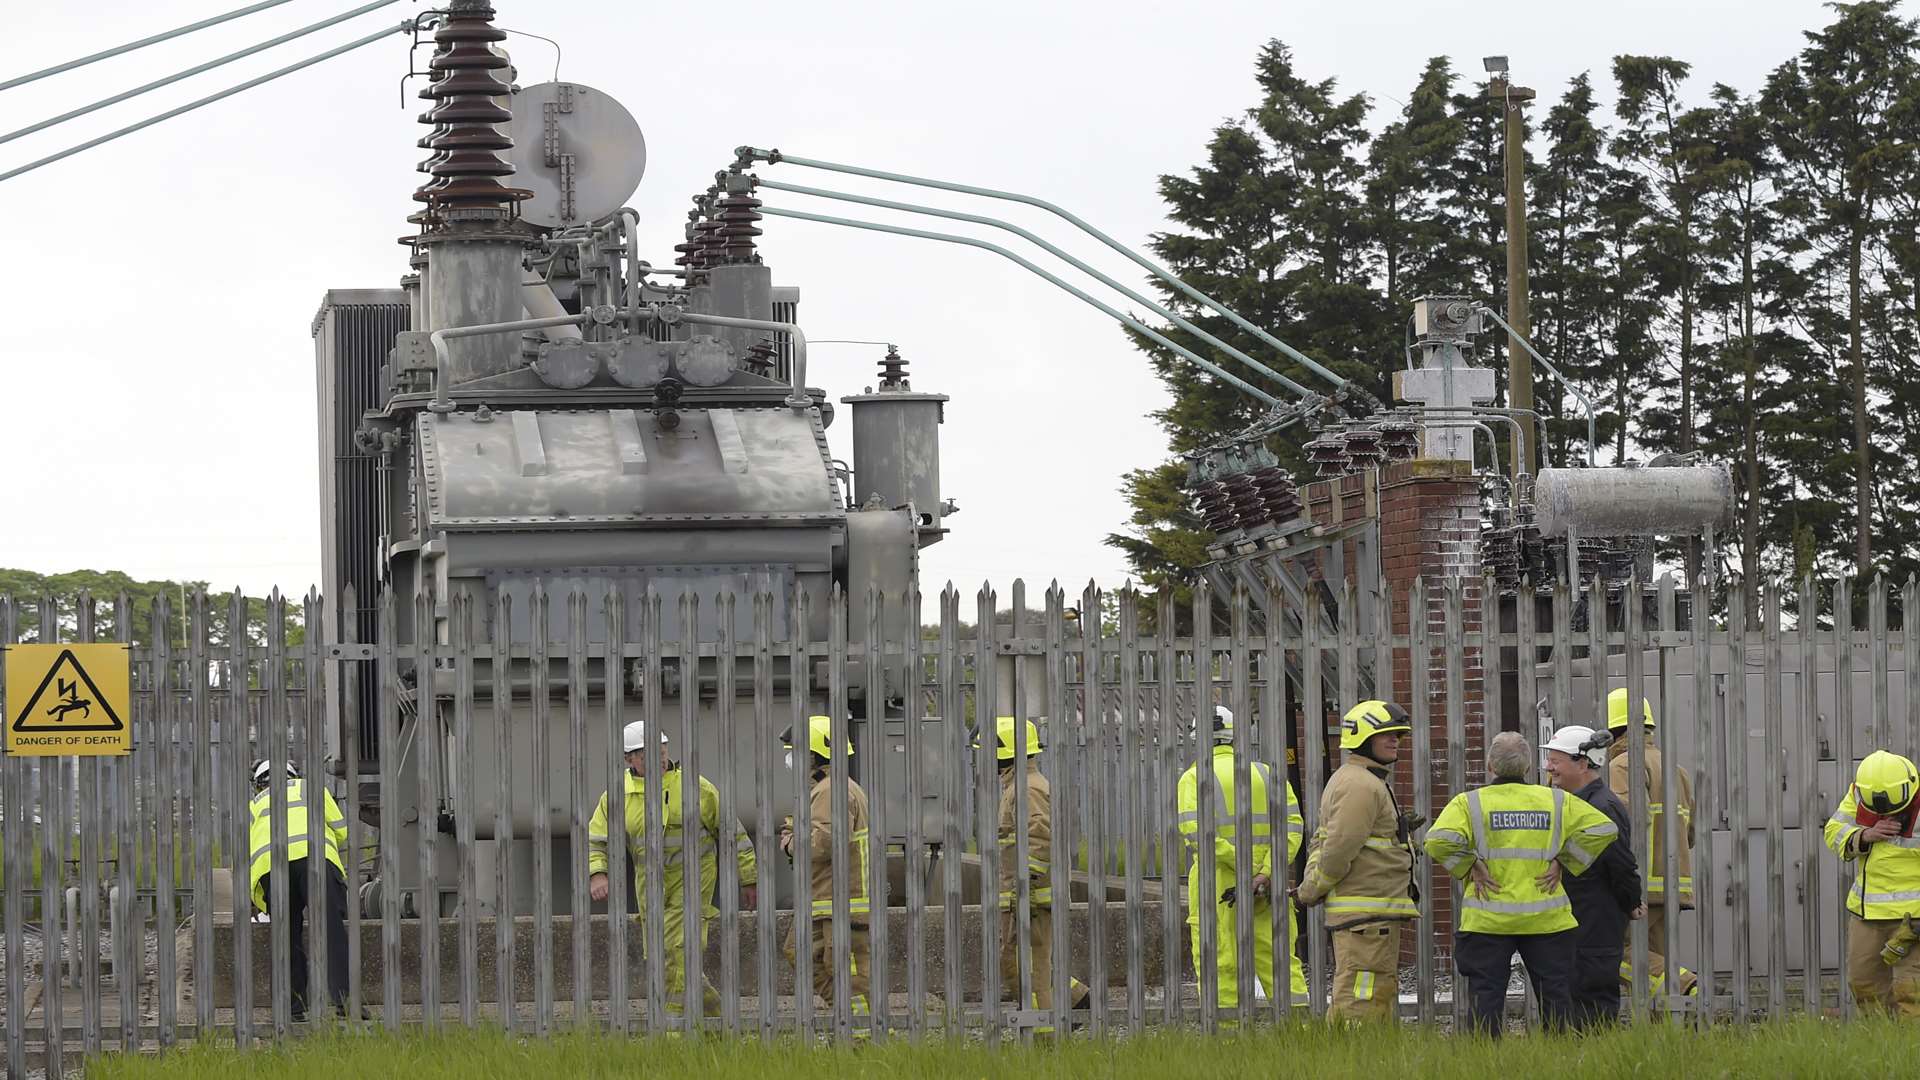 A cordon was put in place while crews dealt with the fire at an electricity substation.